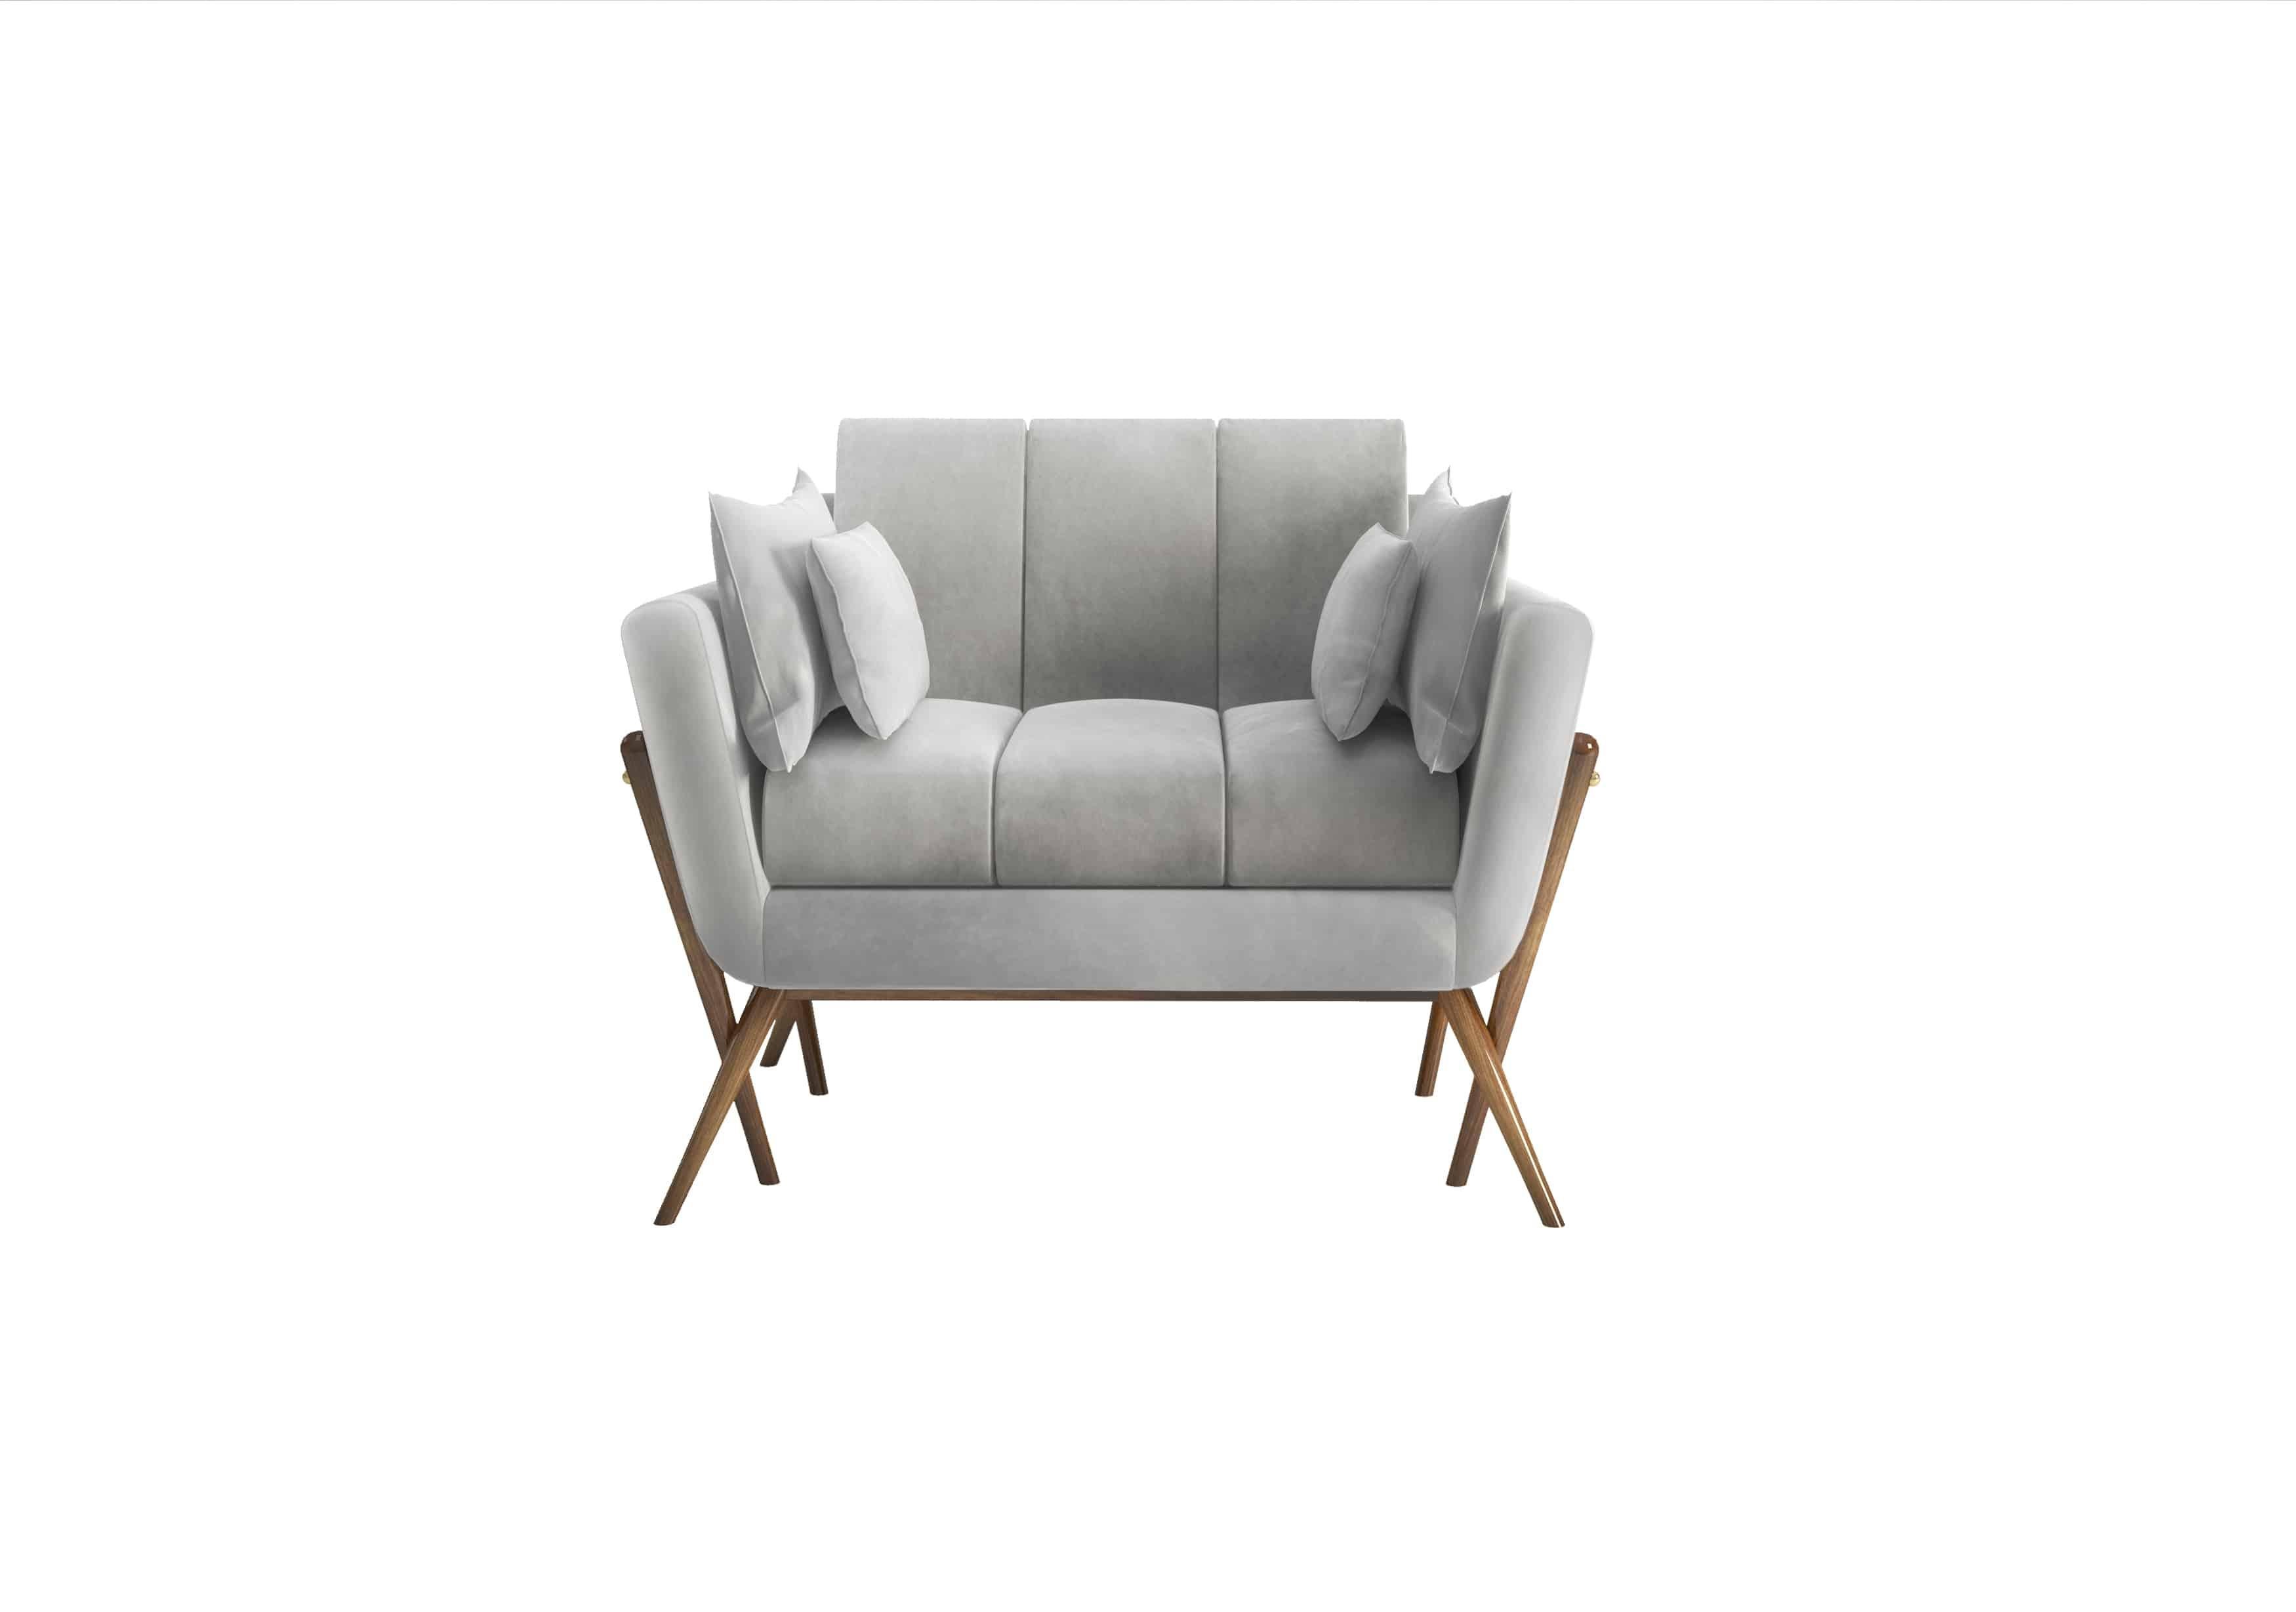 MATERIALS
Upholstery: Light grey velvet
Velvet is water repellent and stain resistant.
Legs: American Walnut with rich grain and is finished in a high-gloss lacquer.
Details: Polished brass 
Pillows: Light grey velvet
Available in COM
Contact us to